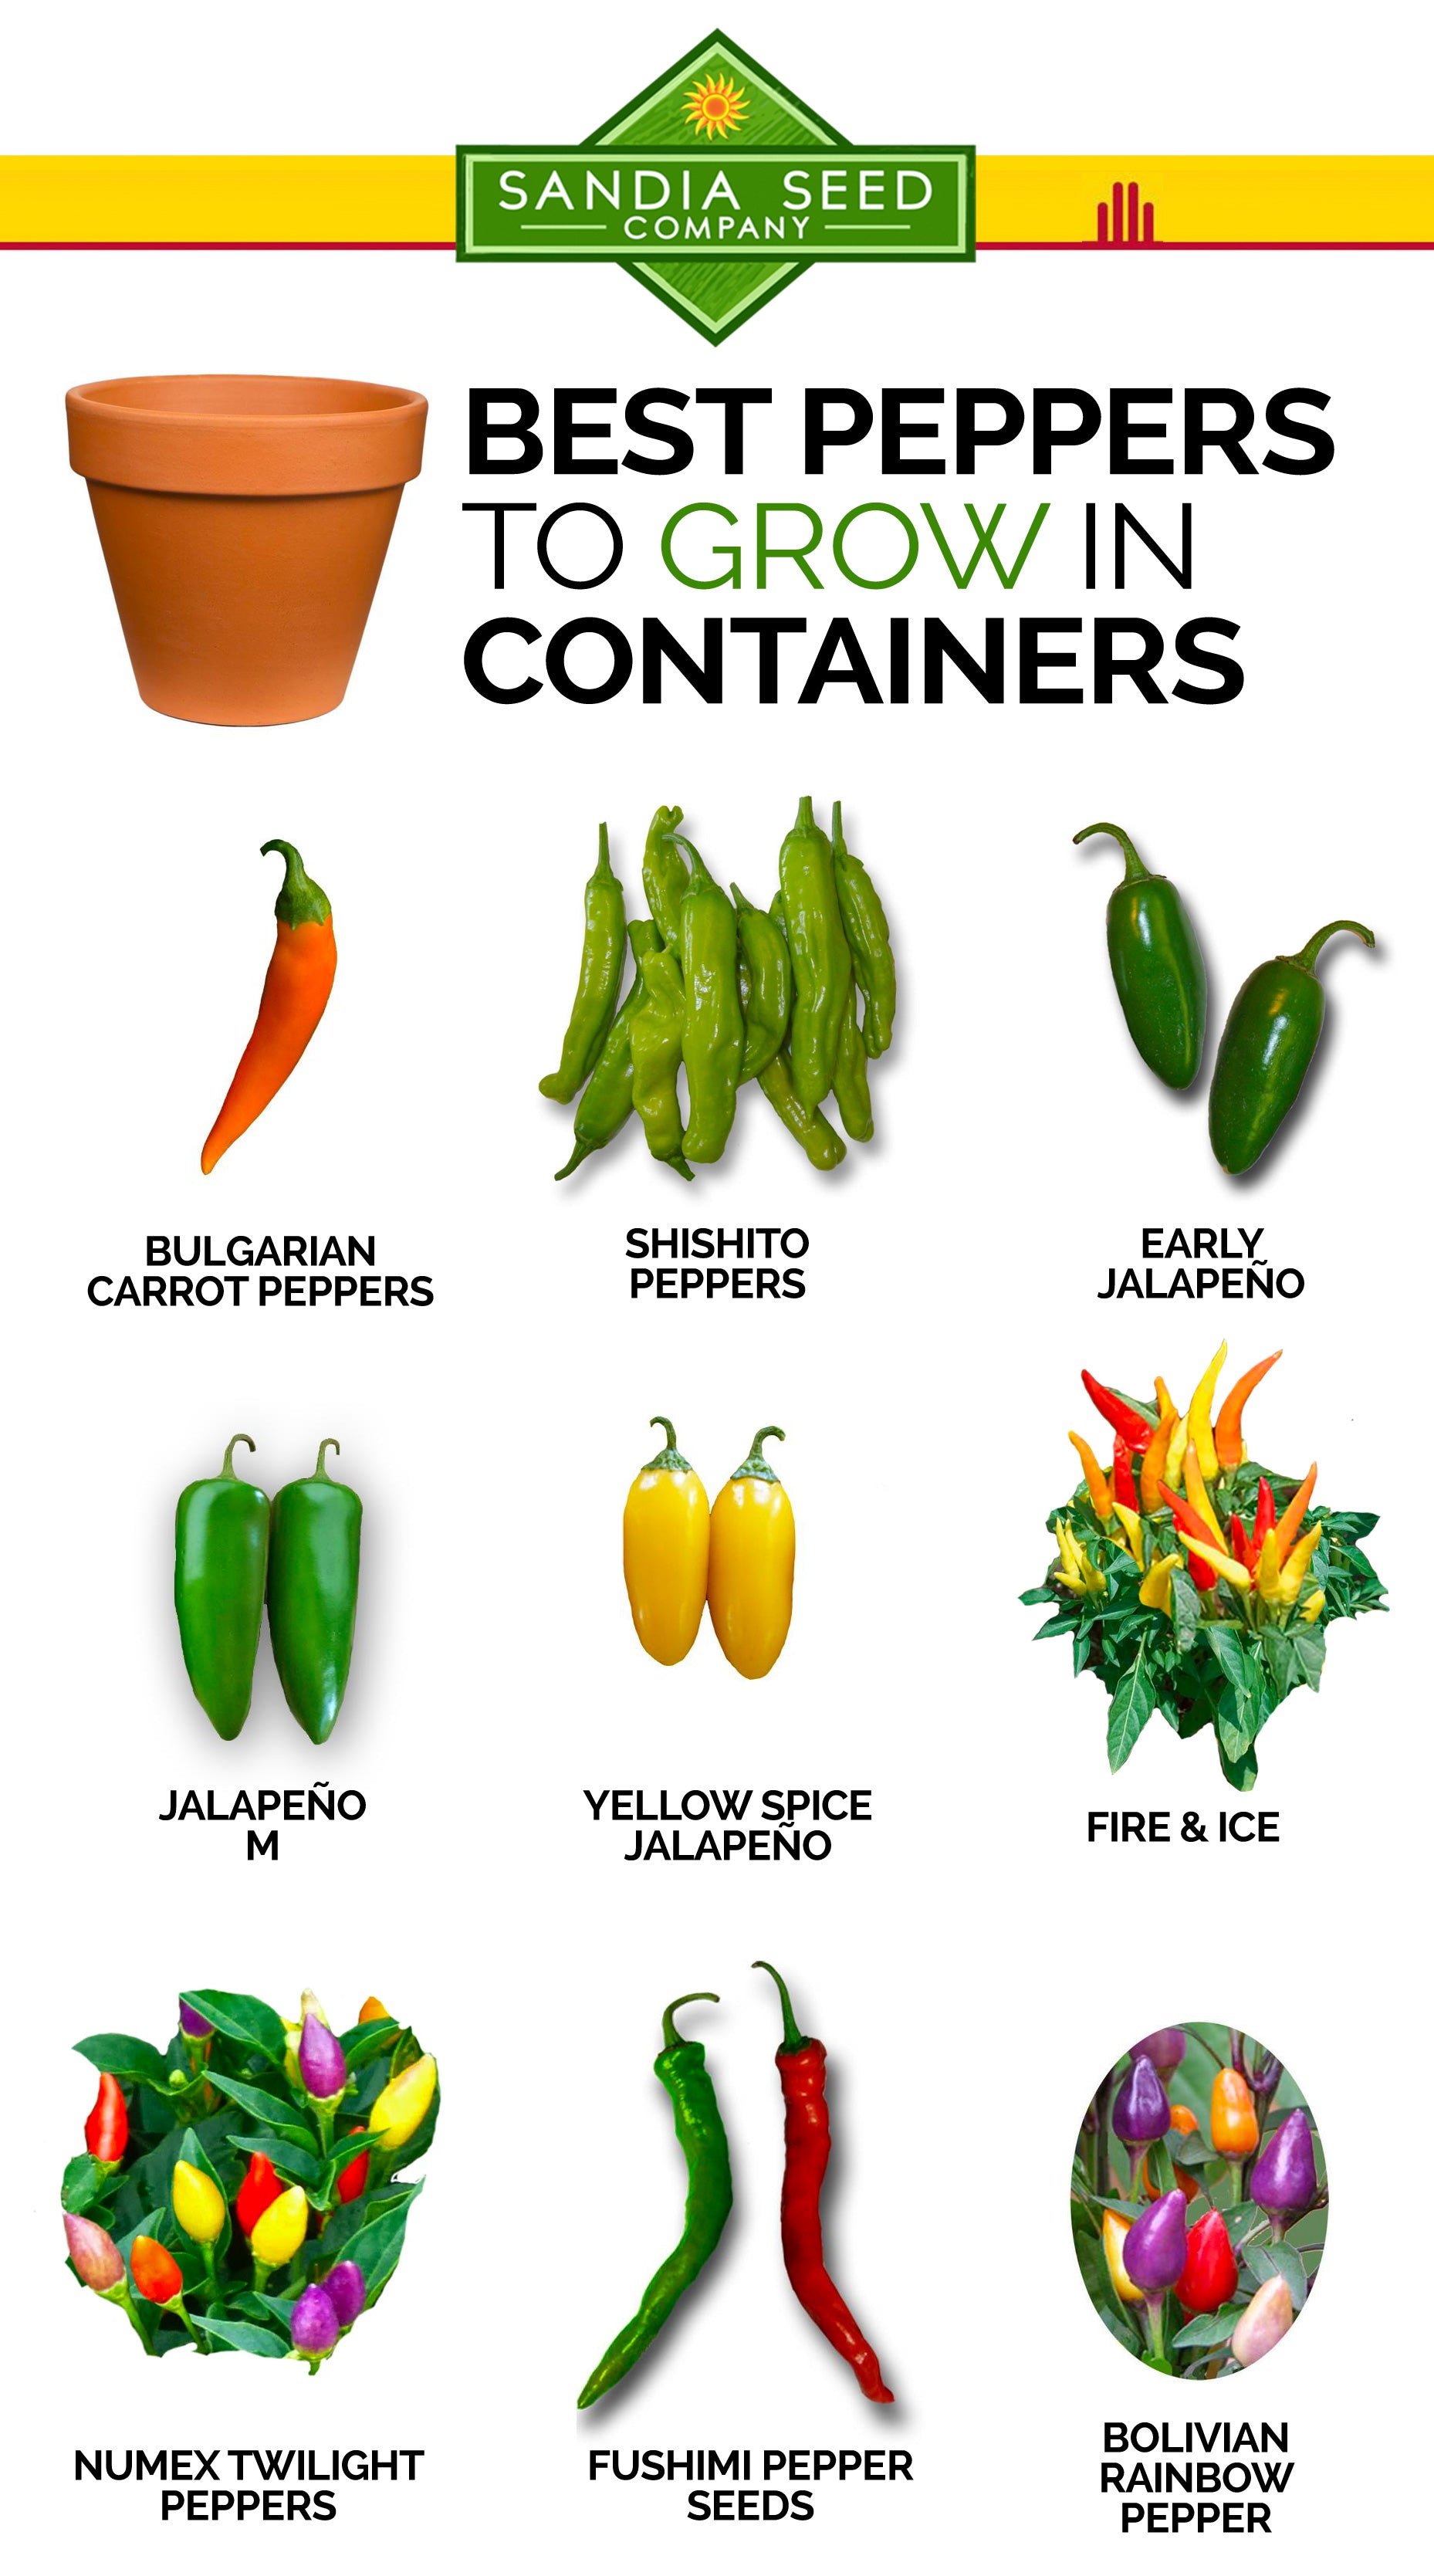 Best Peppers to Grow in Containers – Sandia Seed Company